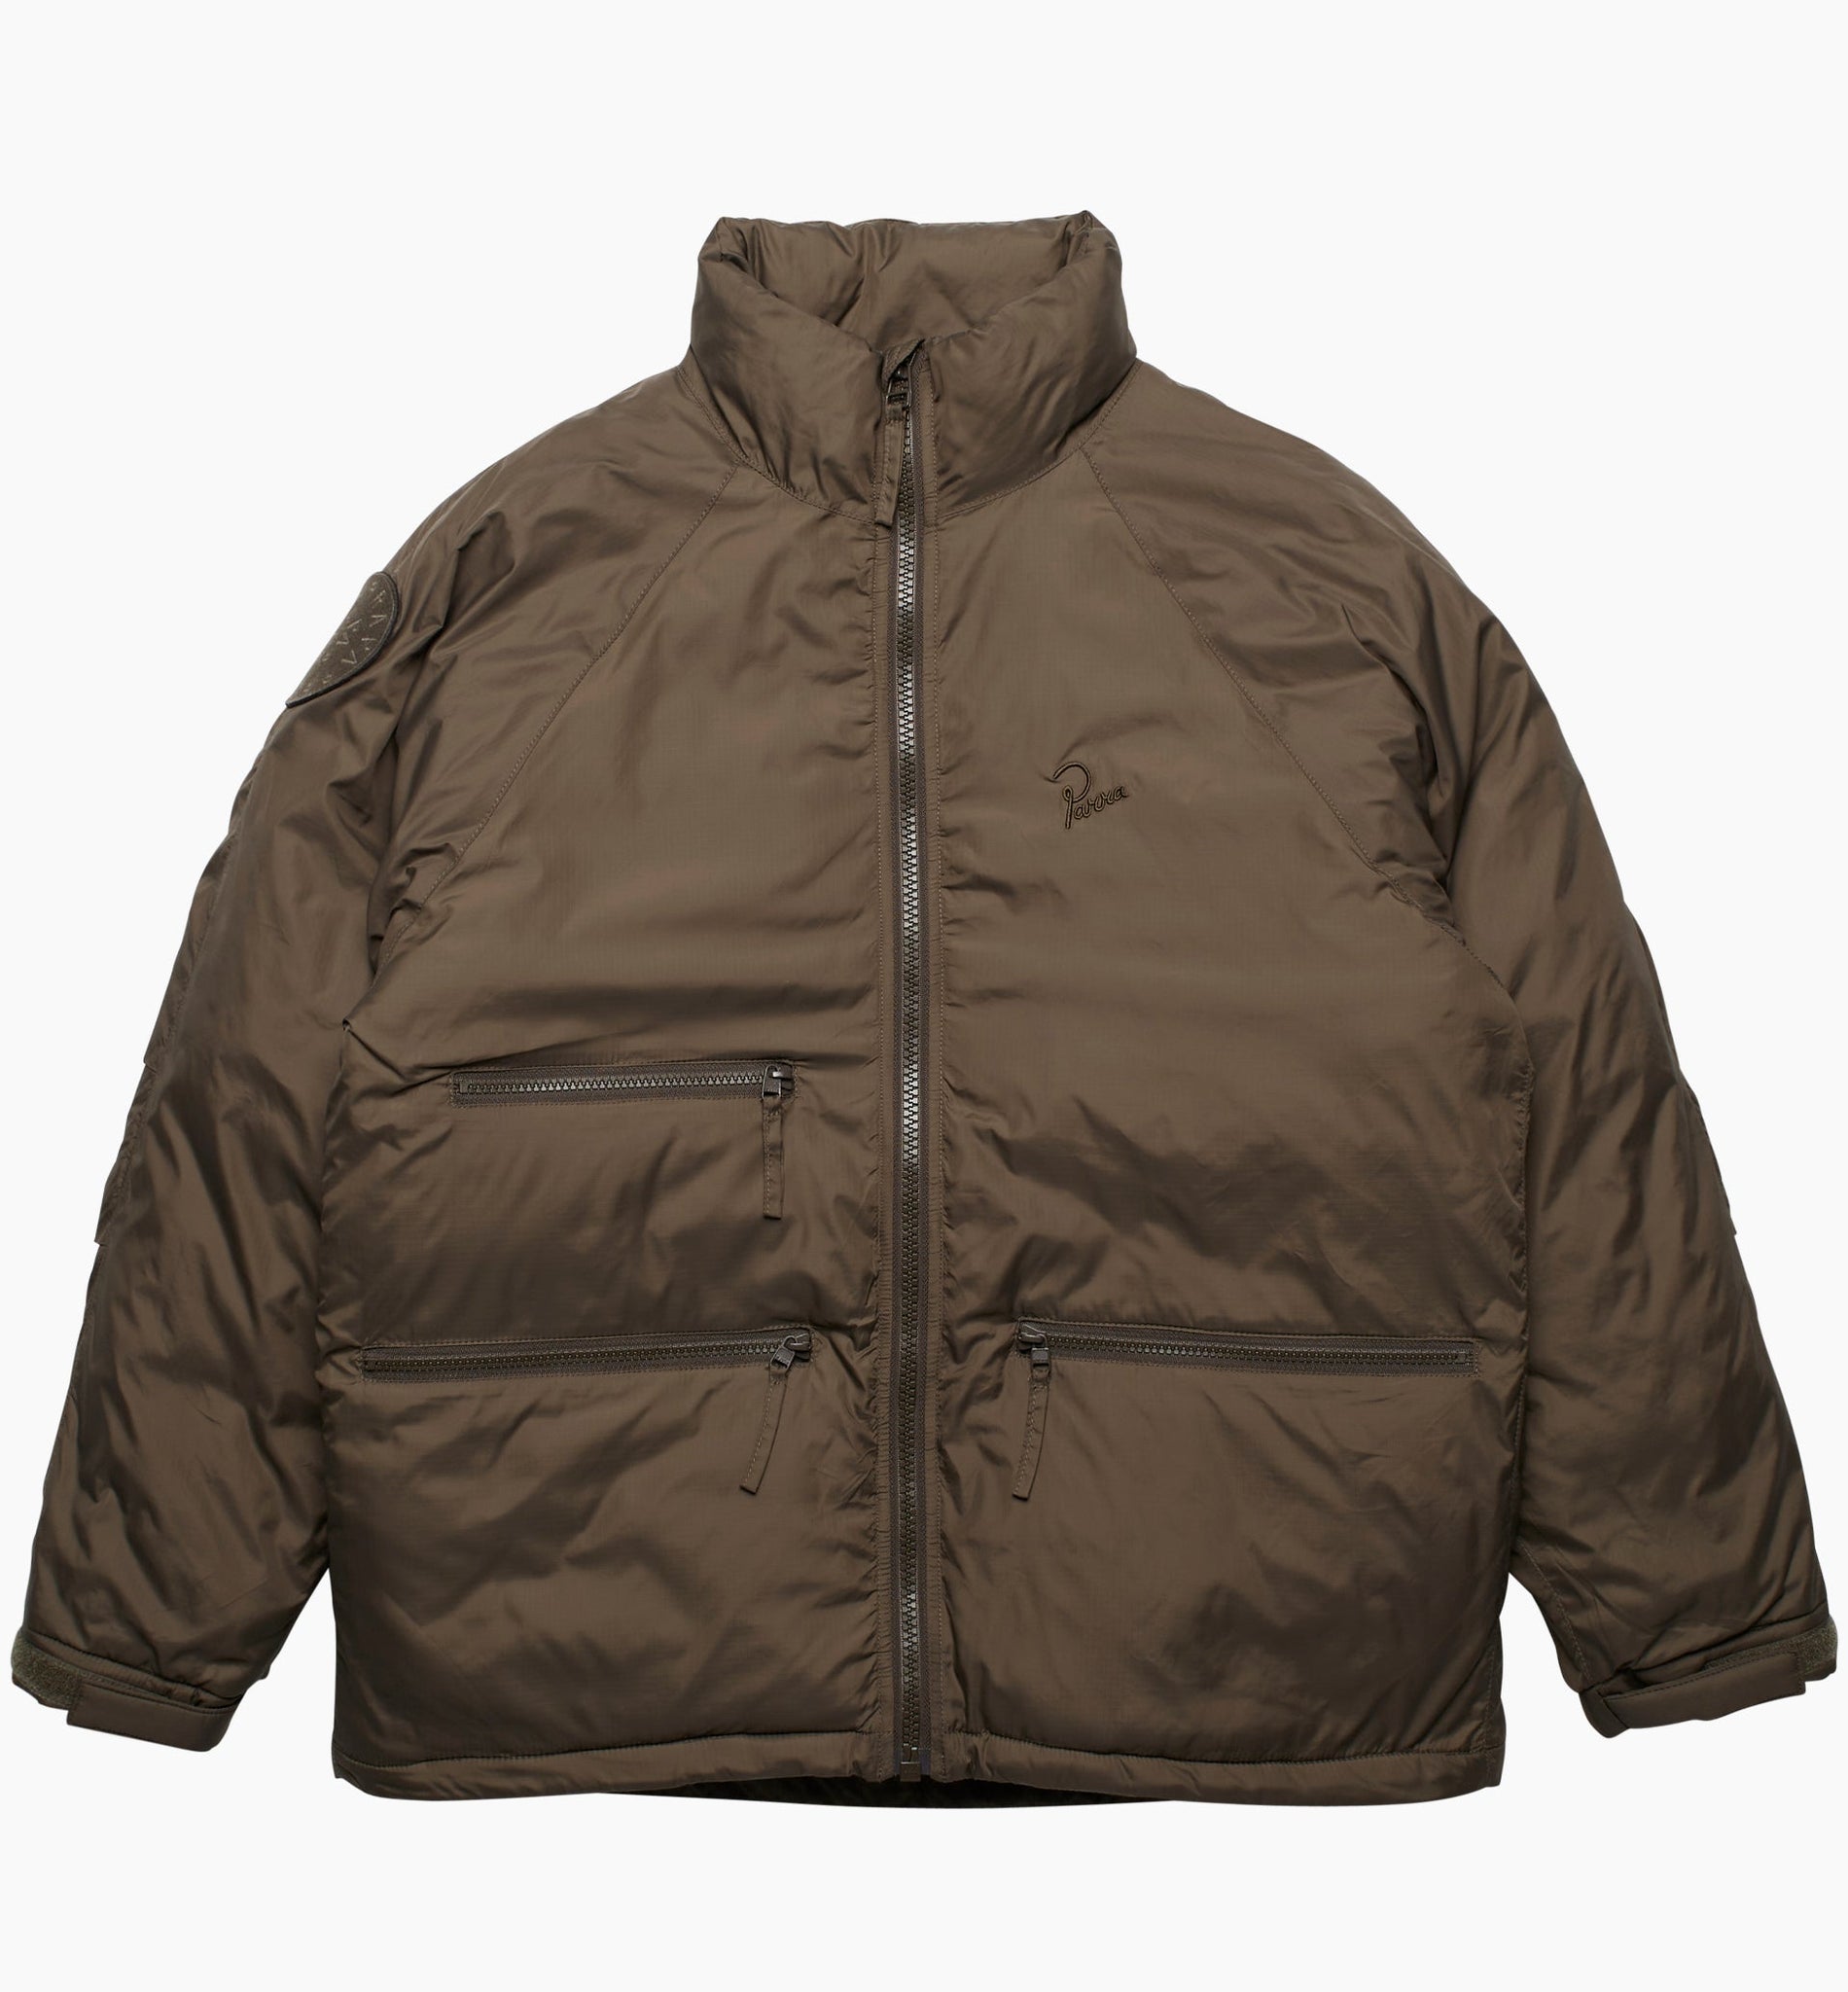 Canyons All Over Jacket - Coffee Brown